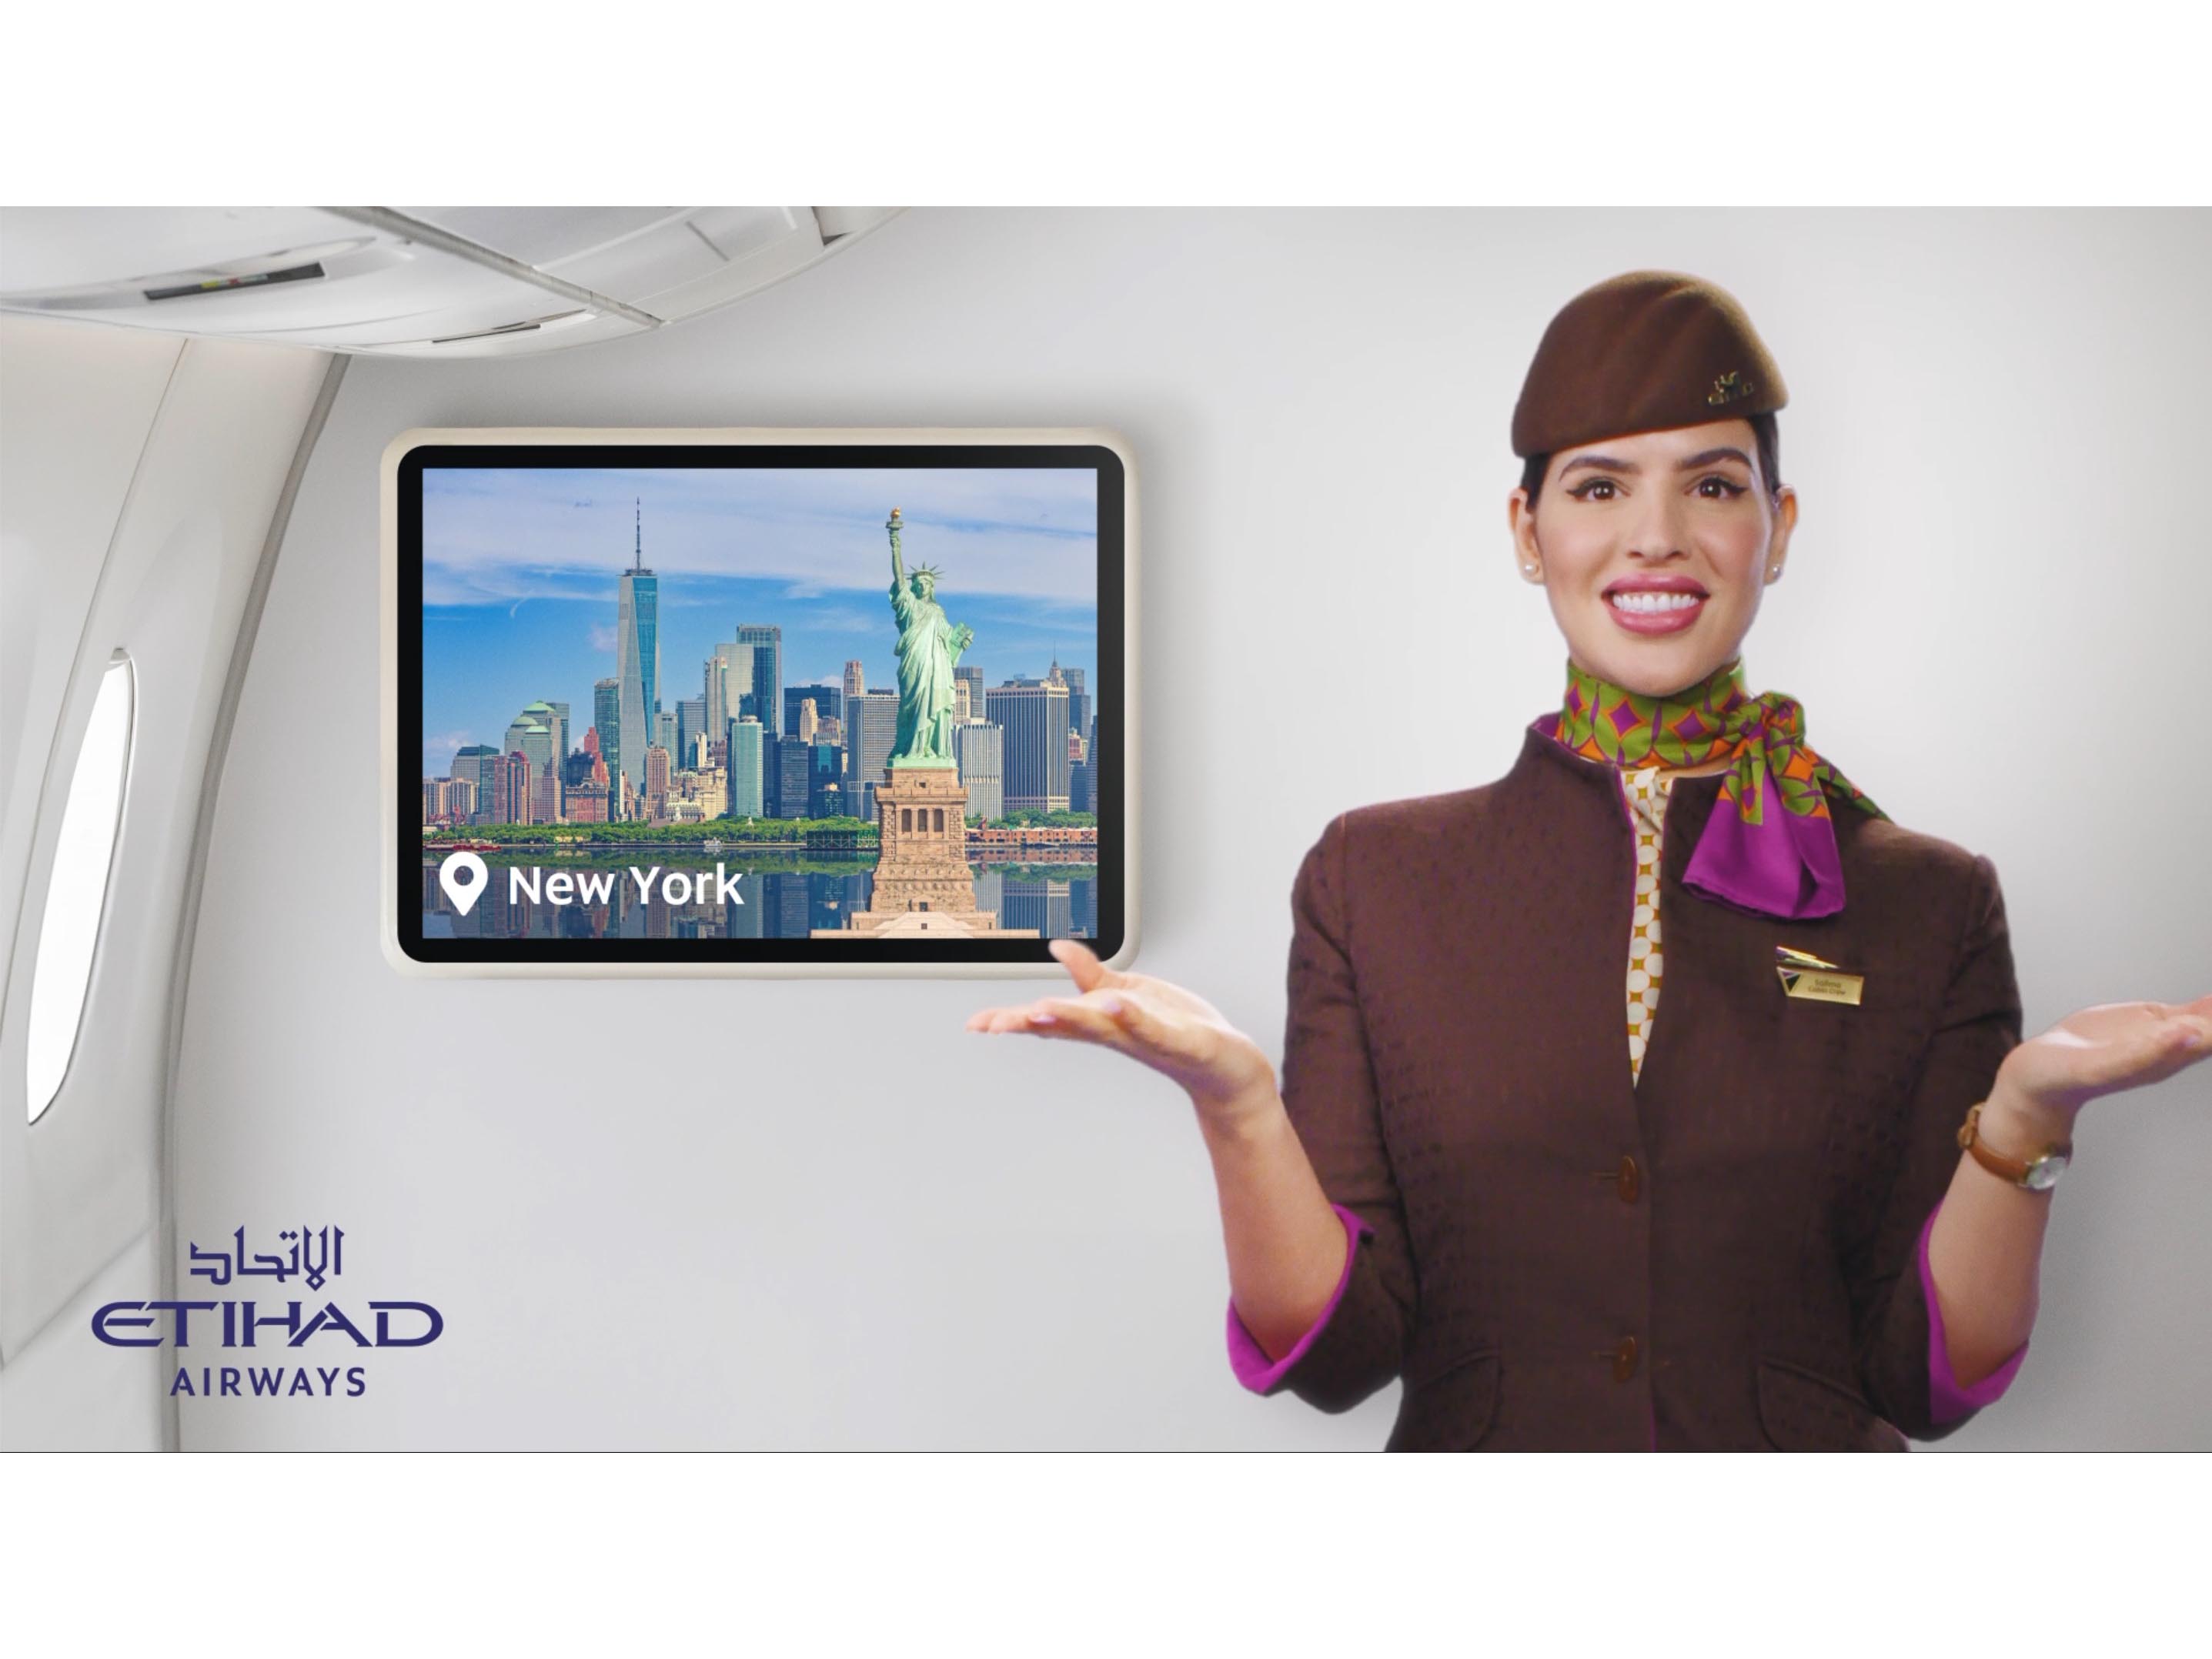 How Etihad Airways’ Black Friday campaign by Impact BBDO delivered amazing results